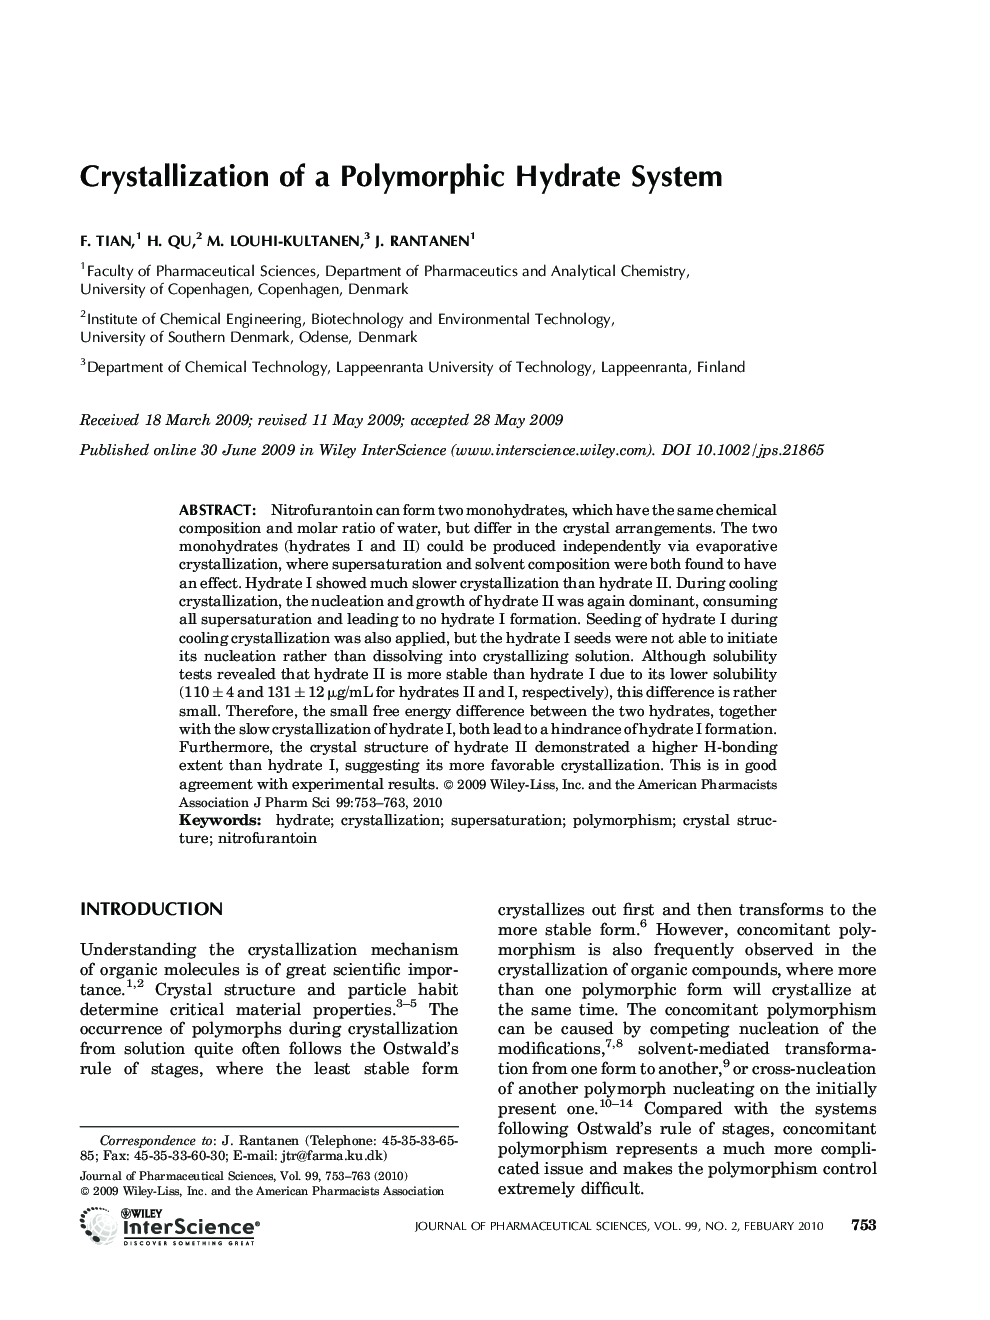 Crystallization of a polymorphic hydrate system